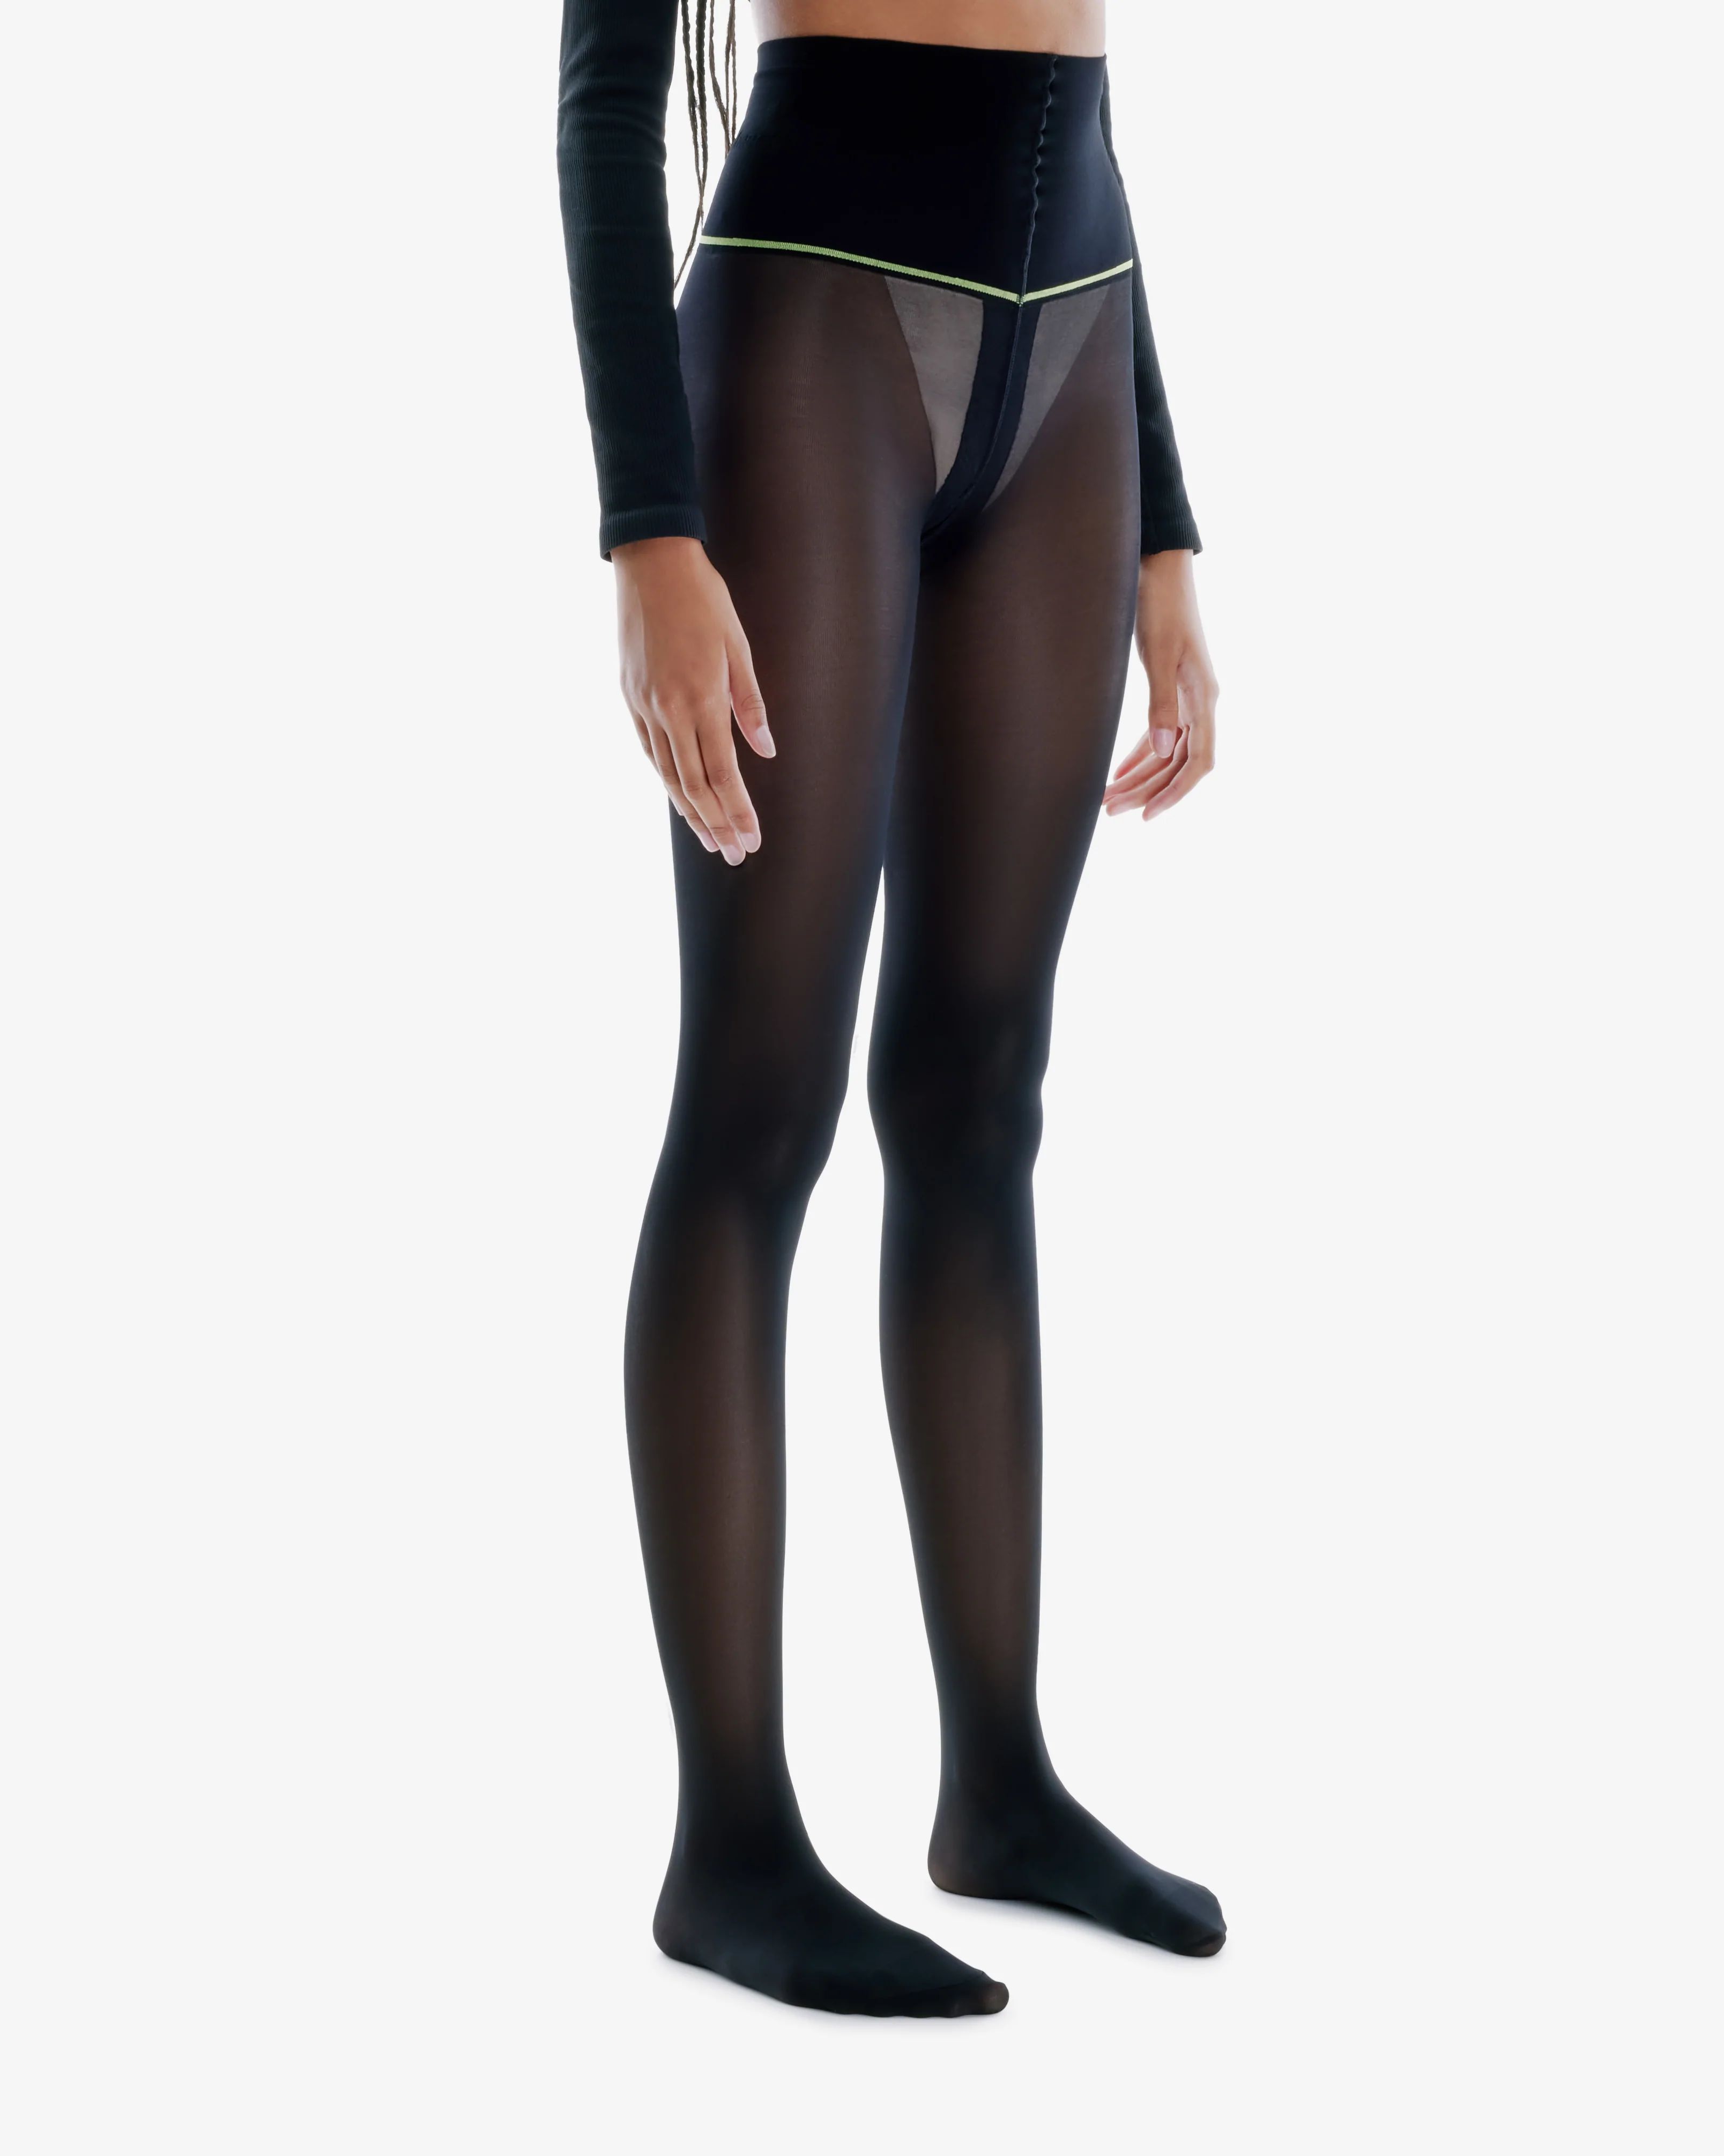 Classic Sheer Tights - Impossibly Resilient Pantyhose | Sheertex | Sheertex